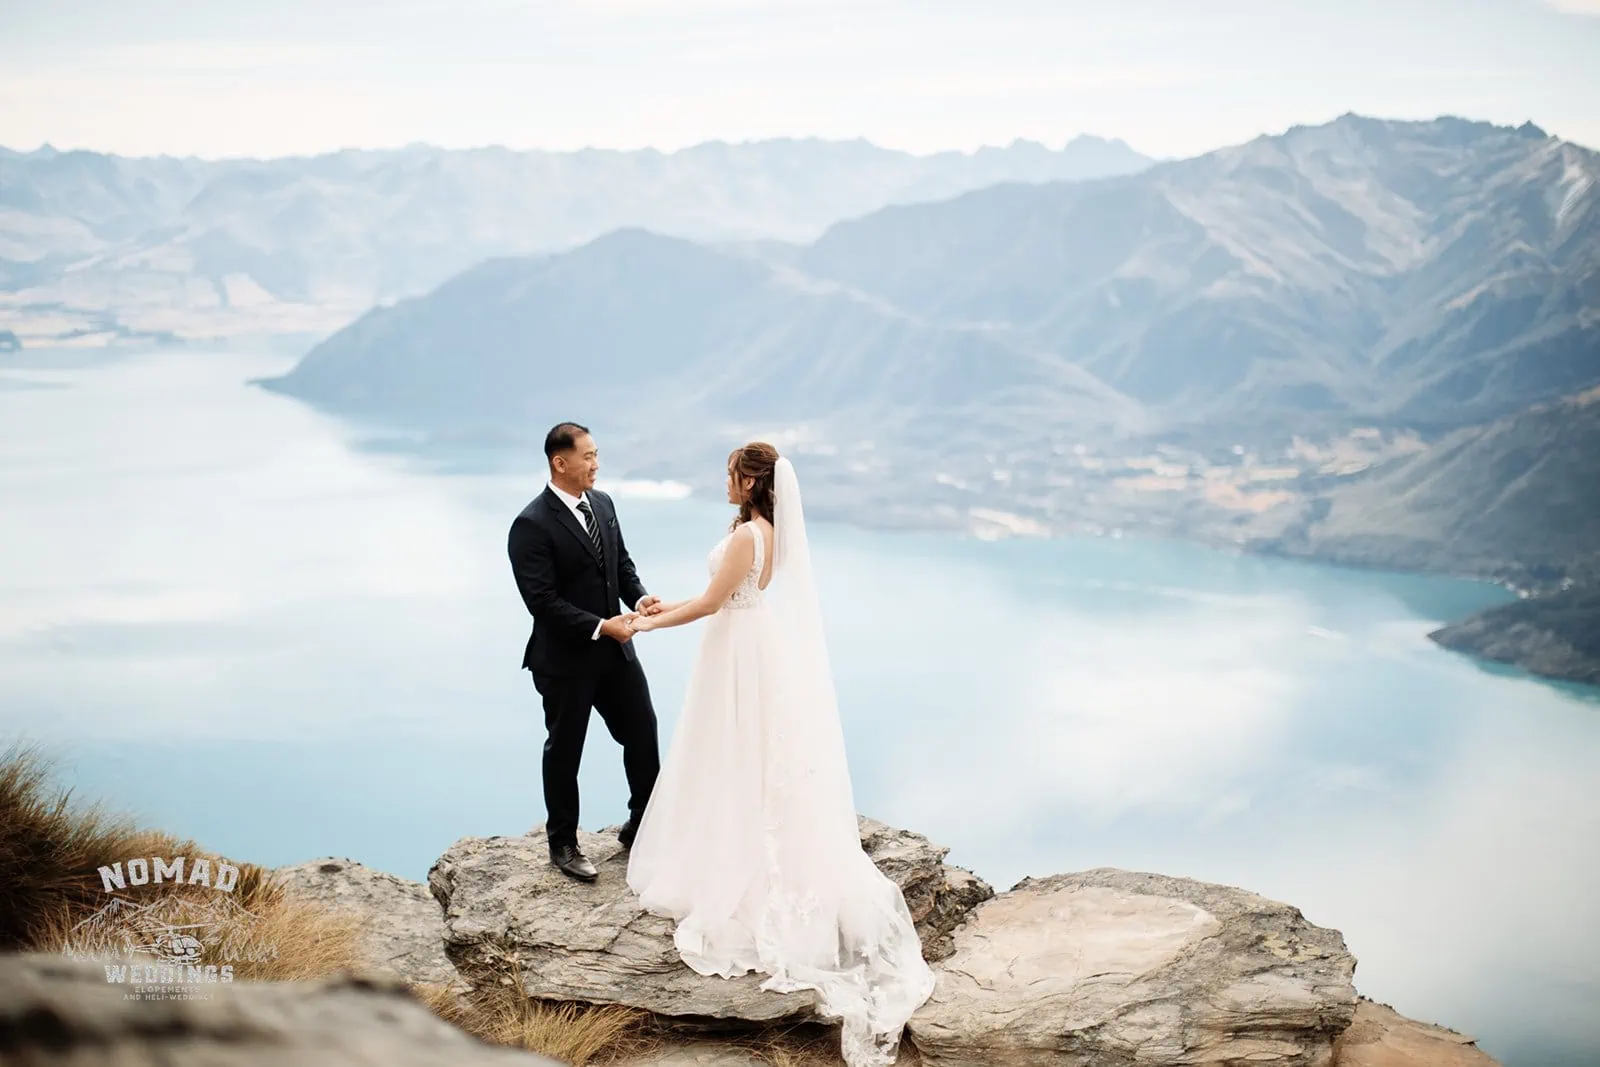 Nhi and Nicholas' pre-wedding shoot on top of a cliff overlooking Lake Wanaka during their Queenstown NZ adventure.